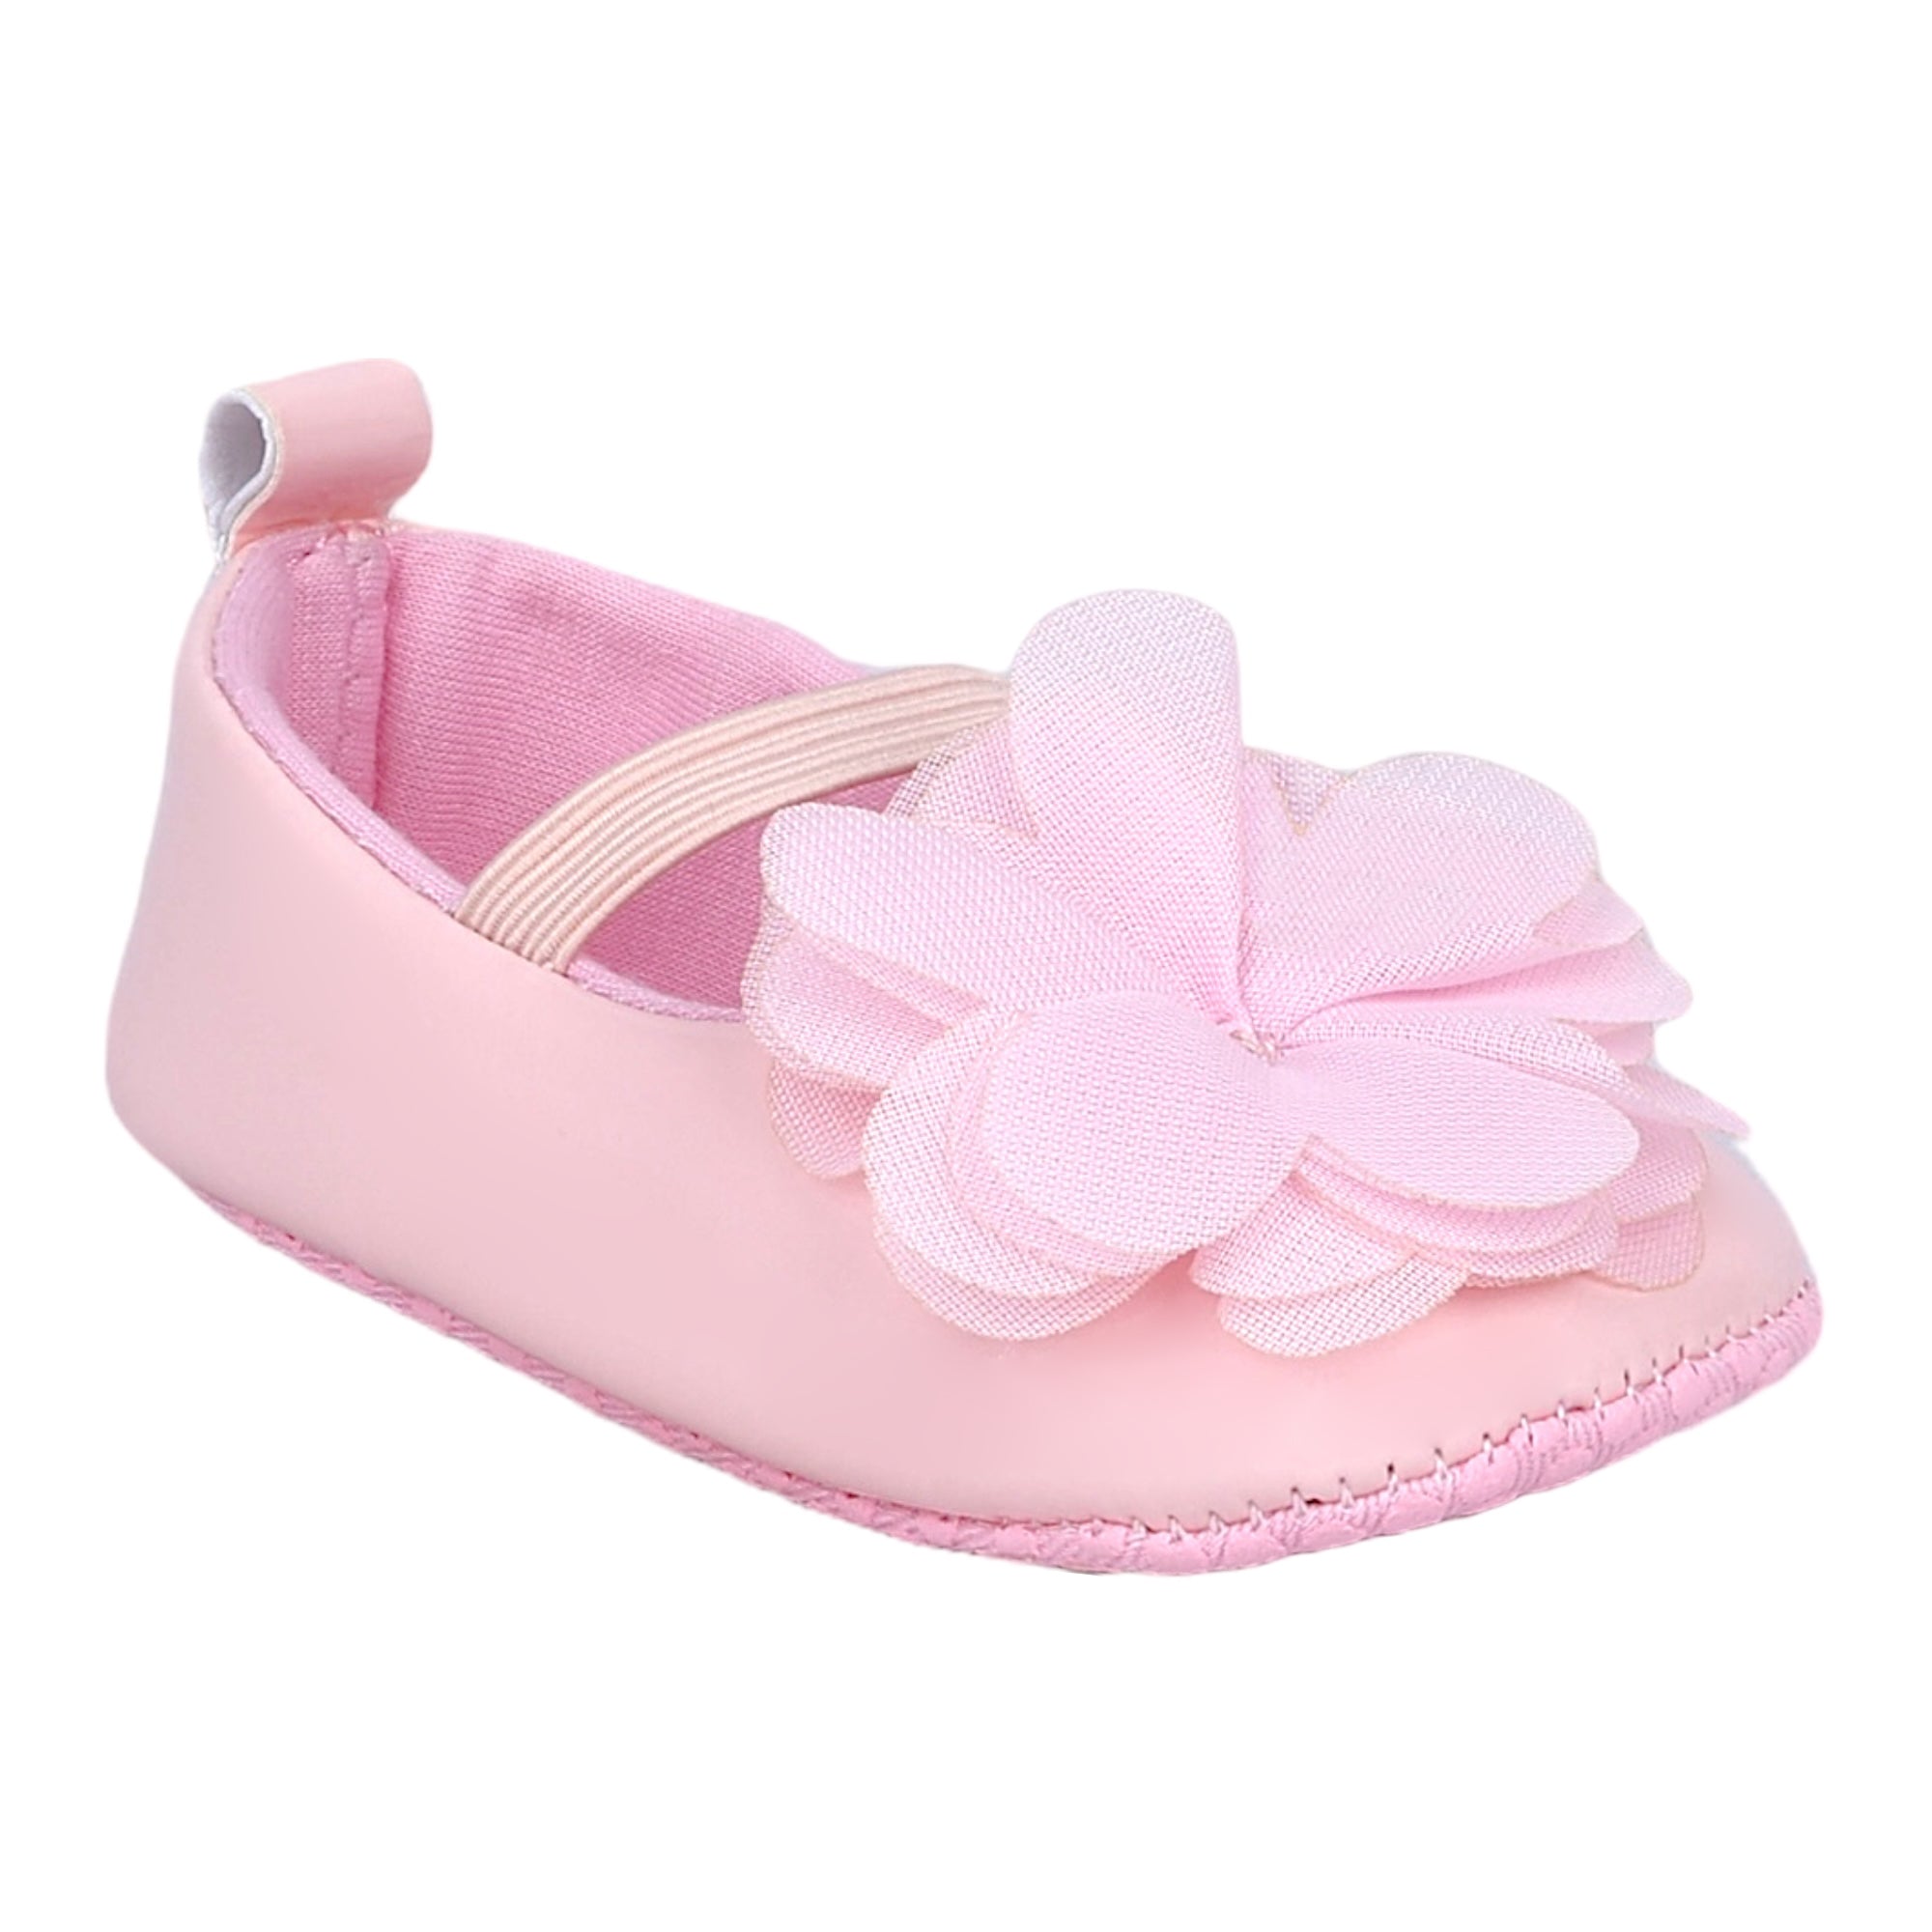 Baby Moo Embellished Flower Patent Leather Slip-On Anti-Skid Ballerina Booties - Pink